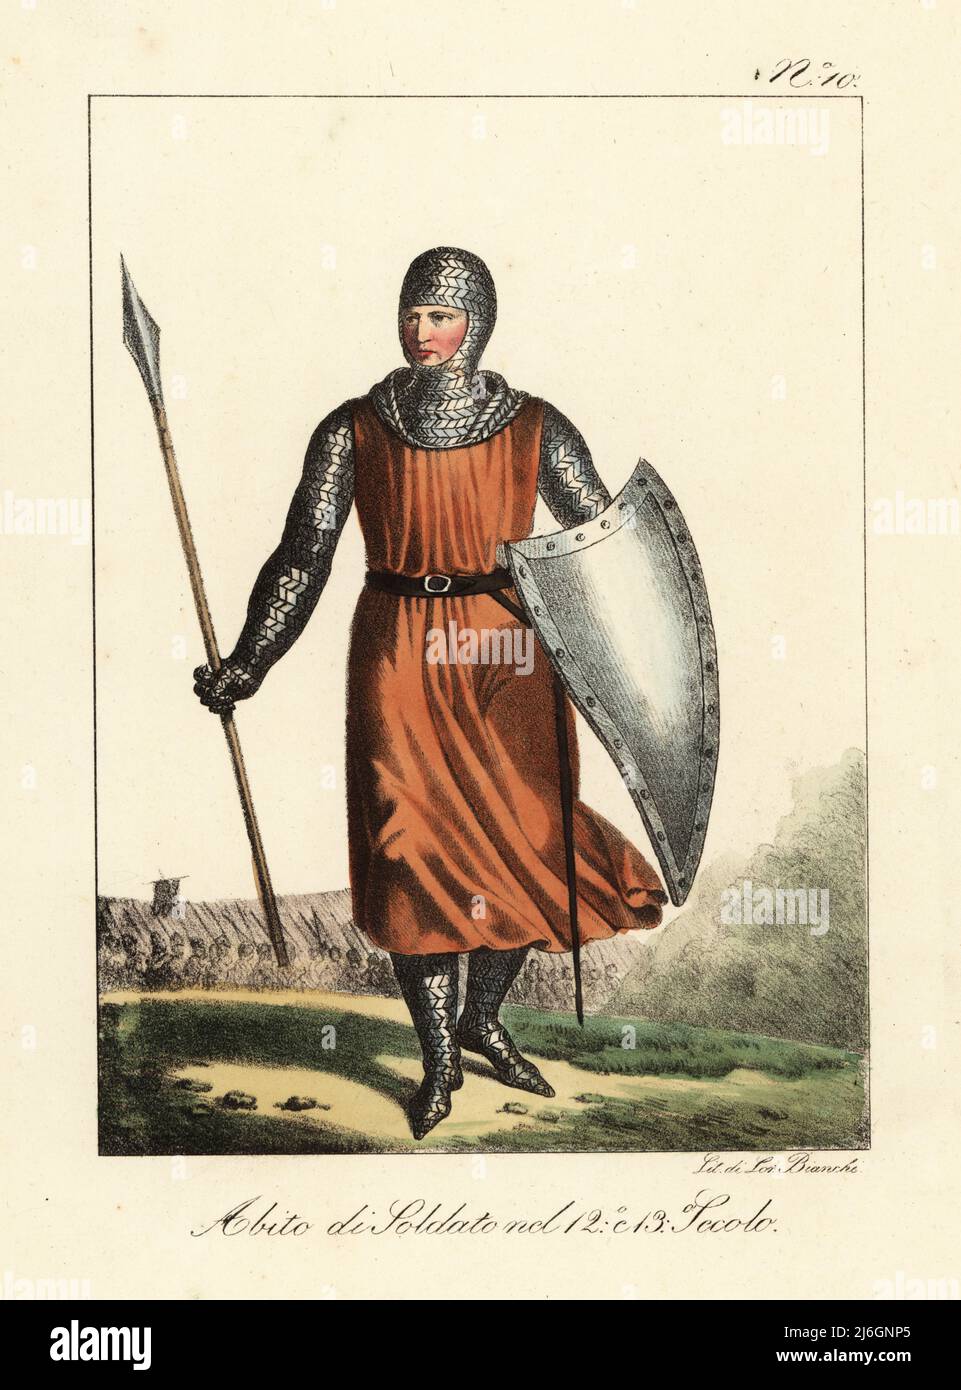 Costume of a French soldier, 12th and 13th century. In chainmail hauberk with hood, tunic, belt, armed with lance, sword and shield. Habit des soldats pendant les 12e et 13e Siecle. Handcoloured lithograph by Lorenzo Bianchi after Hippolyte Lecomte from Costumi civili e militari della monarchia francese dal 1200 al 1820, Naples, 1825. Italian edition of Lecomte’s Civilian and military costumes of the French monarchy from 1200 to 1820. Stock Photo